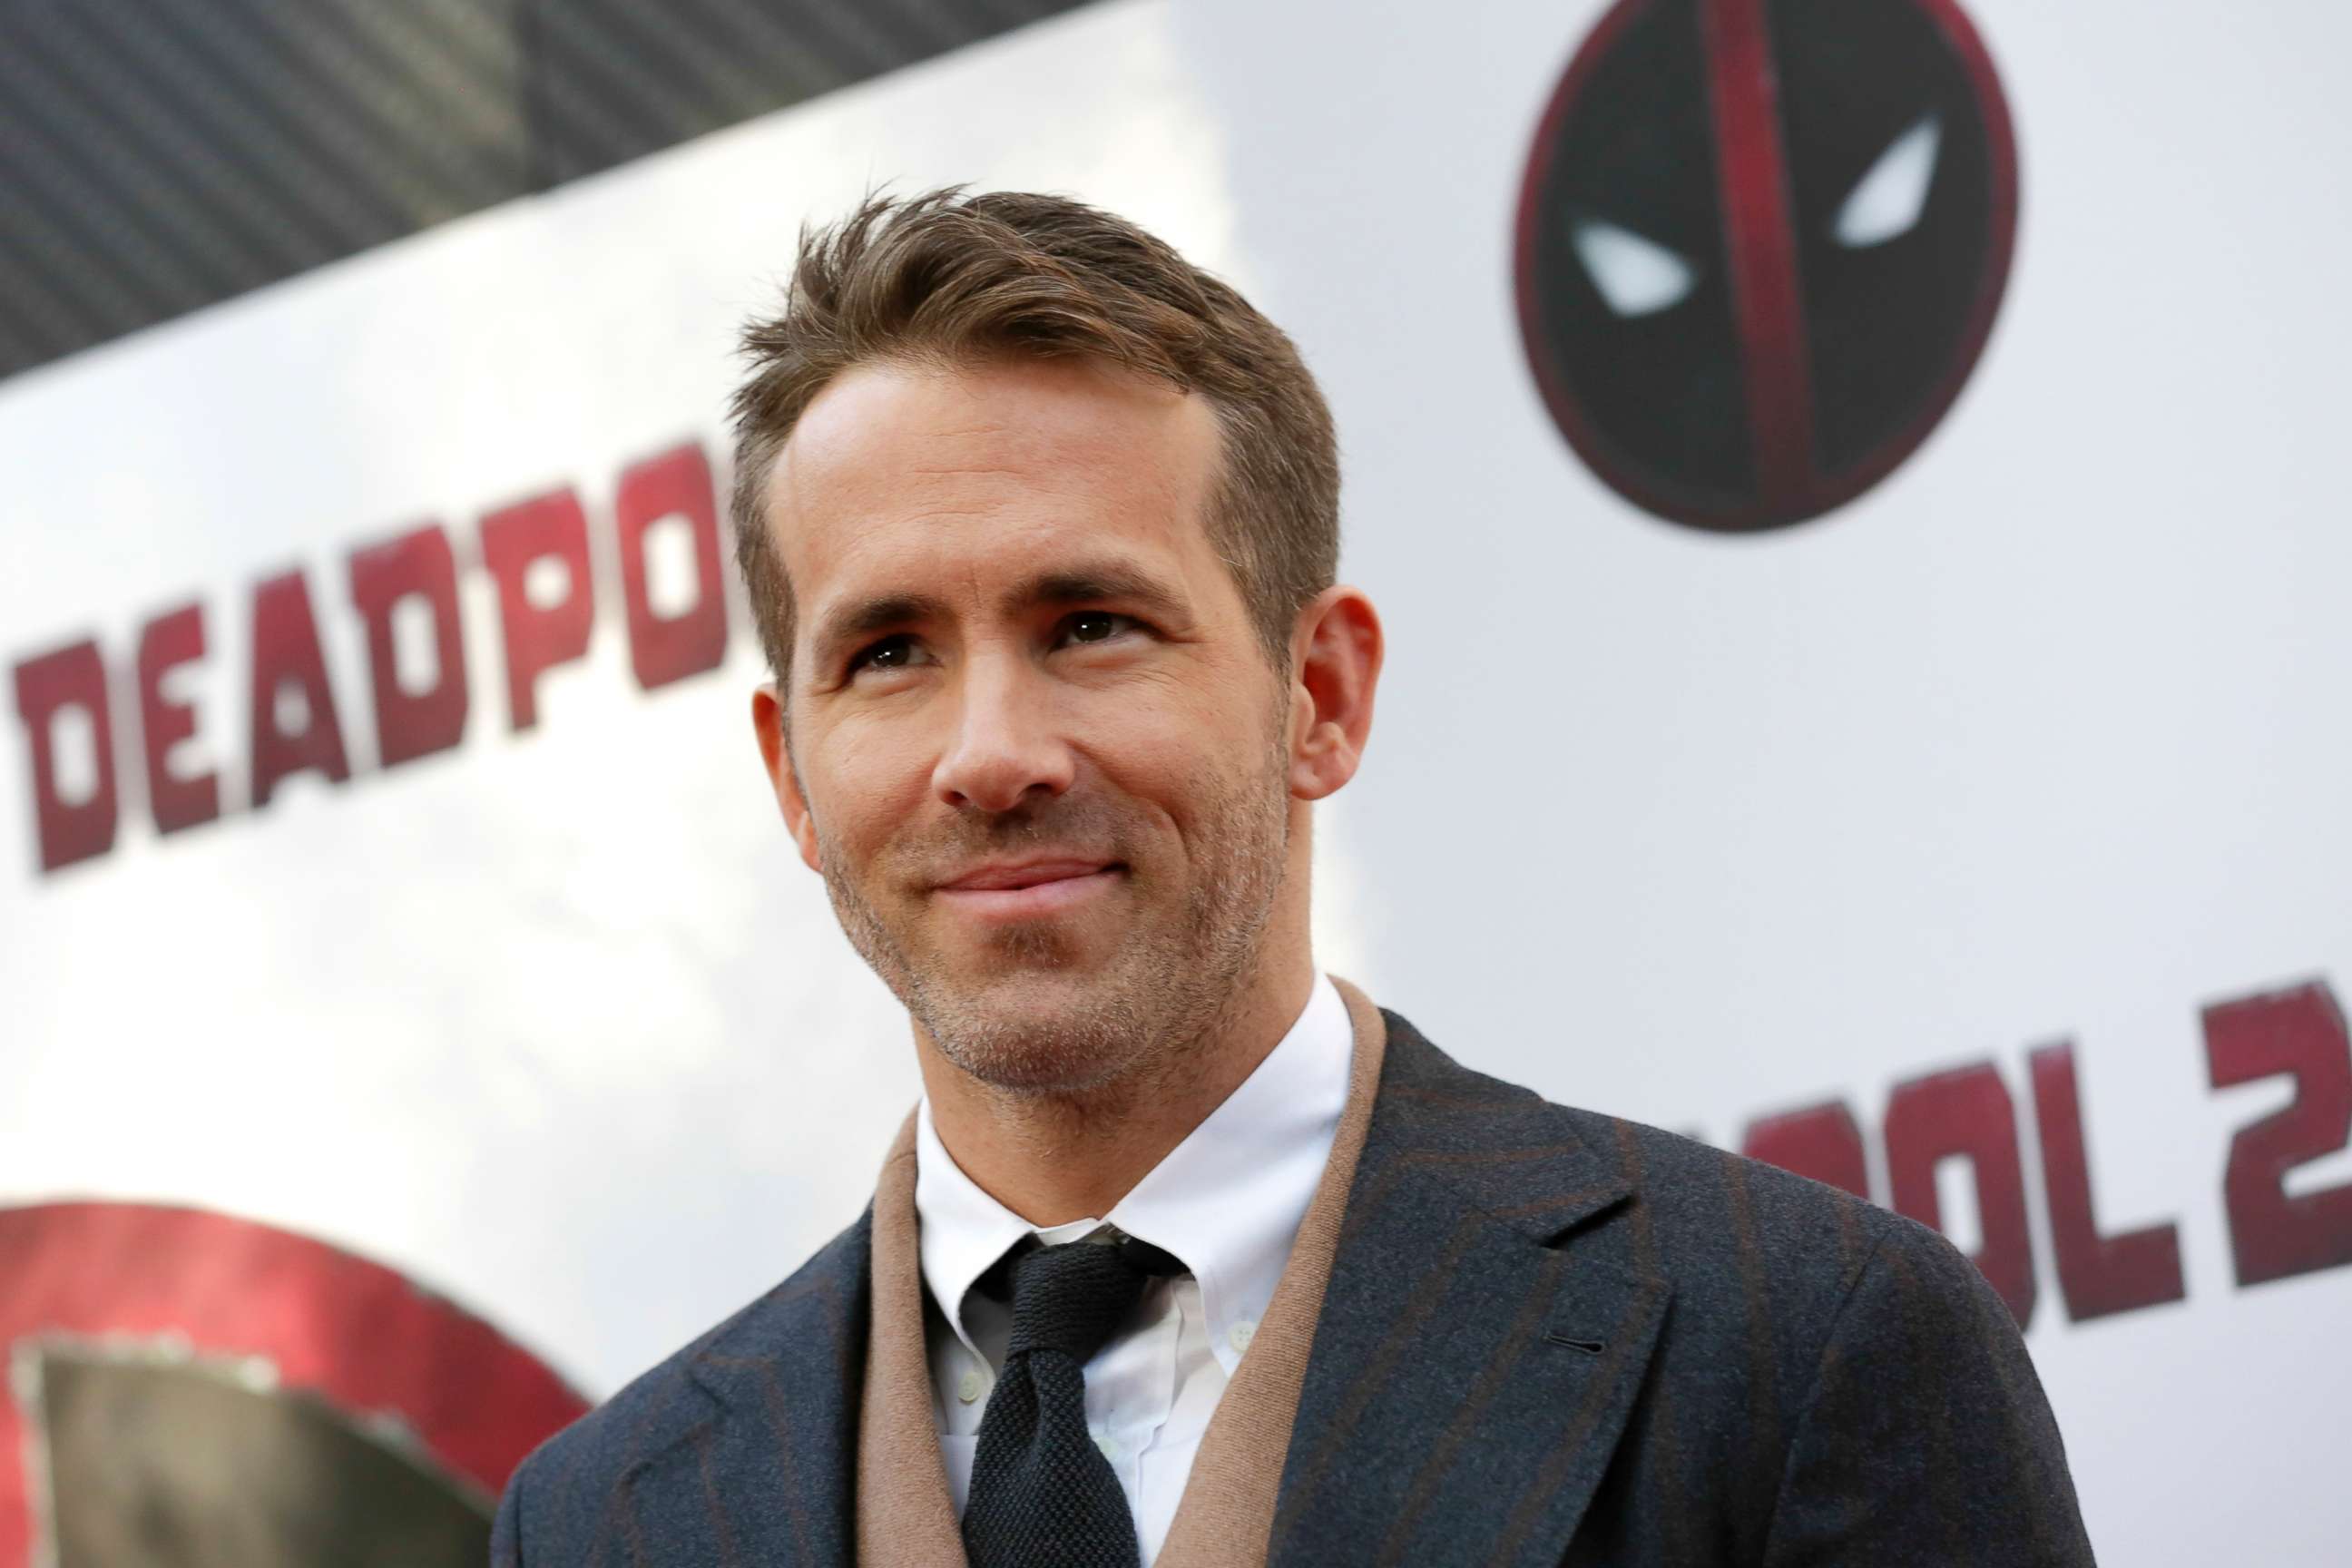 PHOTO: Ryan Reynolds attends a special screening of his film, "Deadpool 2," at AMC Loews Lincoln Square in New York, May 14, 2018.